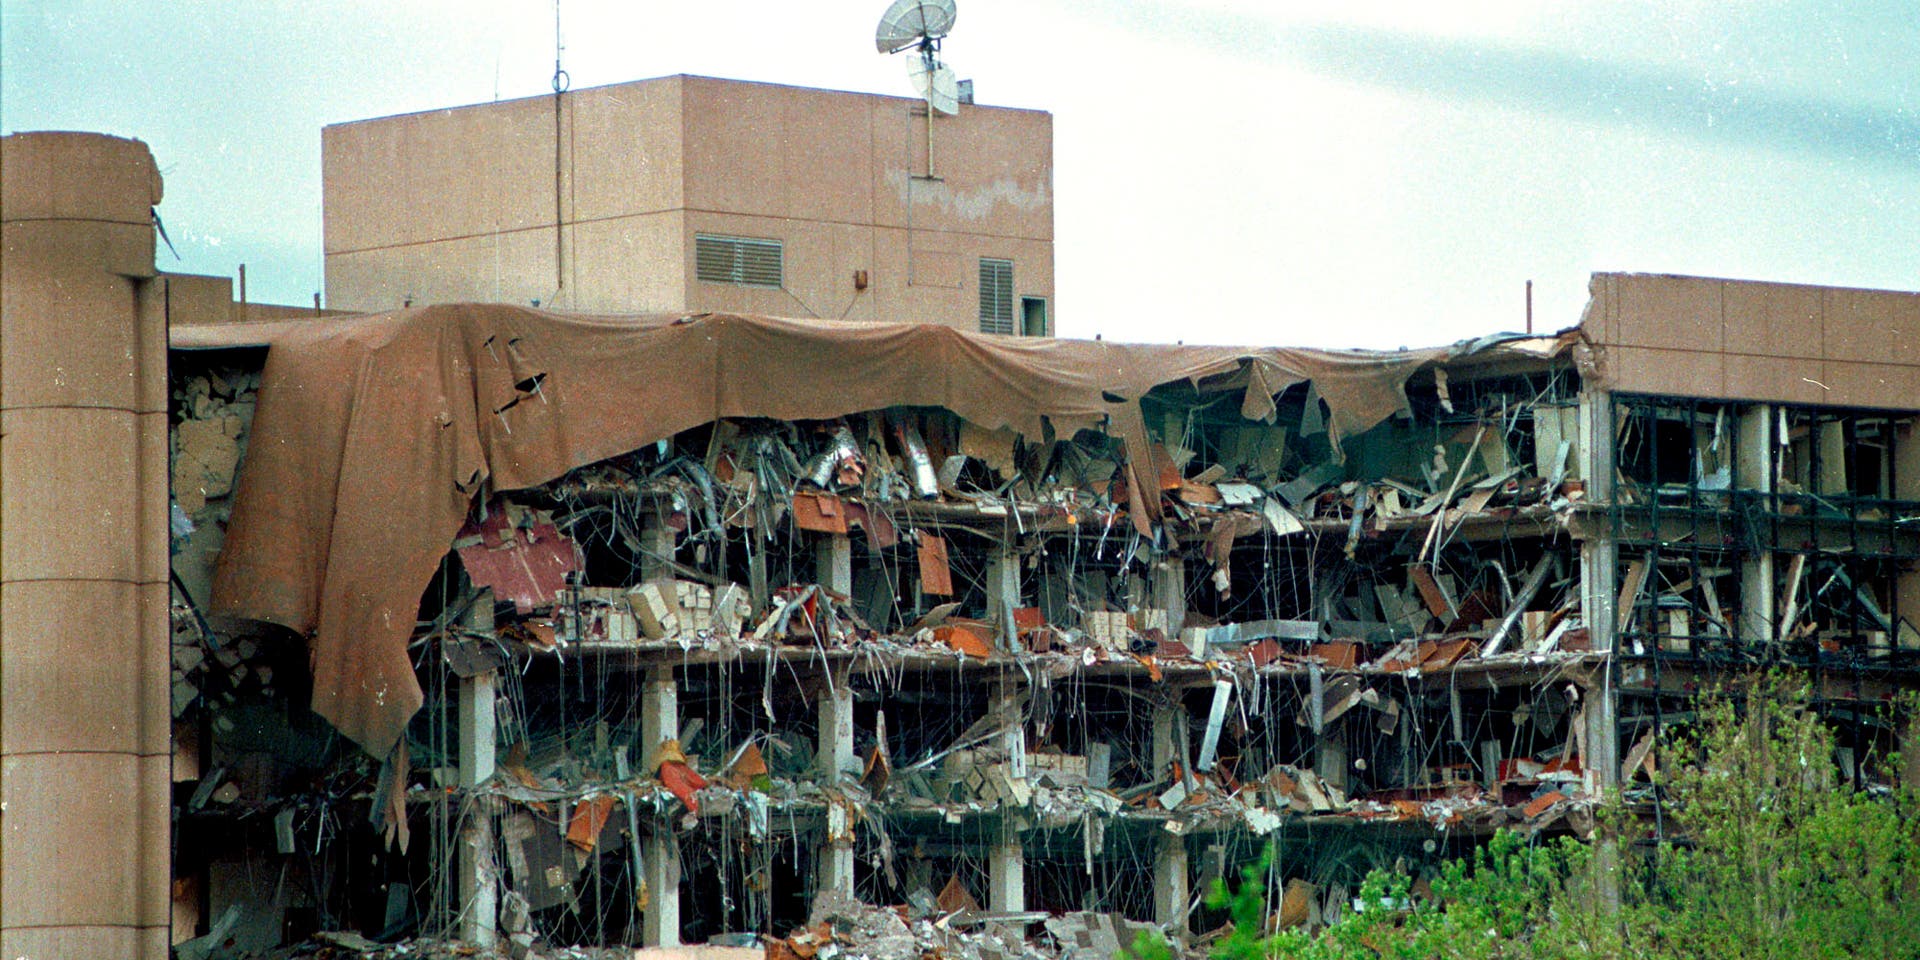 Oklahoma City BombingN220195 02: FILE PHOTO: Protective covering drapes over the Alfred P. Murrah Federal Building in Oklahoma City, April 19, 1995 where a terrorist bomb killed 168 people. On the fifth anniversary of the bombing, survivors, victims'' family members, friends and rescue personnel gathered at the bombing site April 19, 2000 to officially dedicate a national park built to honor the people killed in the 1995 bombing. (Photo by J. Pat Carter/Liaison)